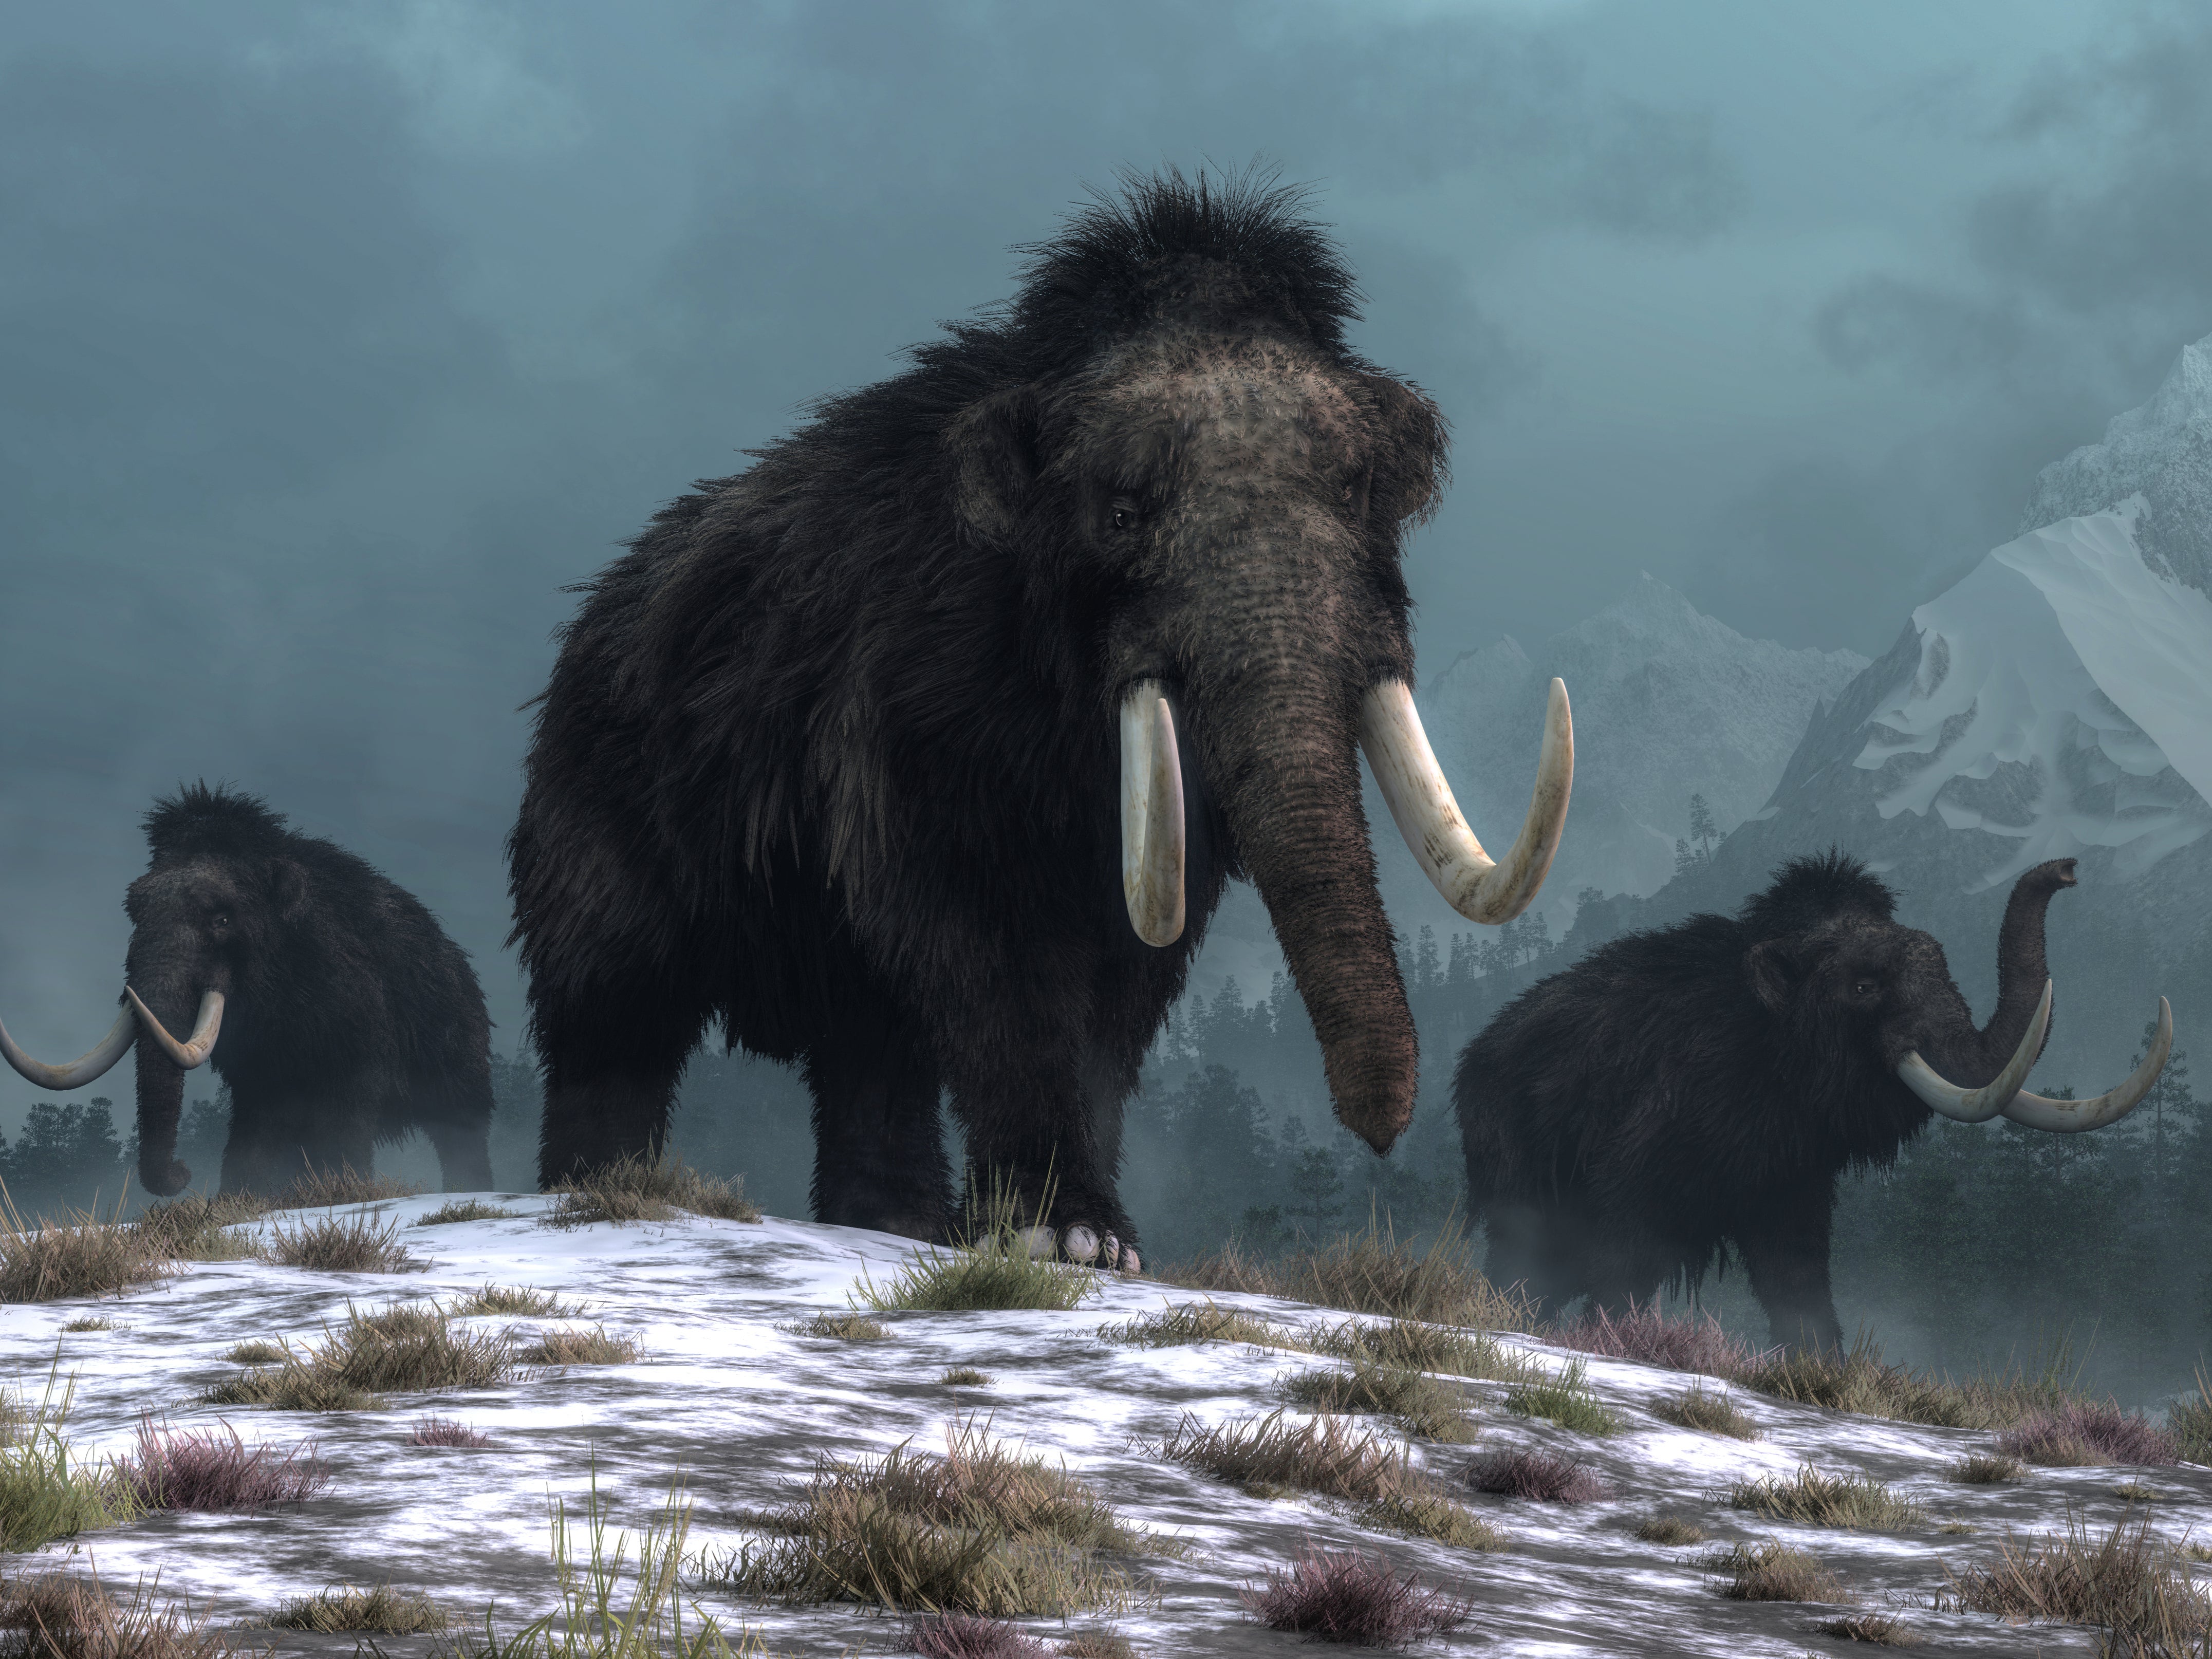 Mammoths may have helped to stop wildfires, new research suggests